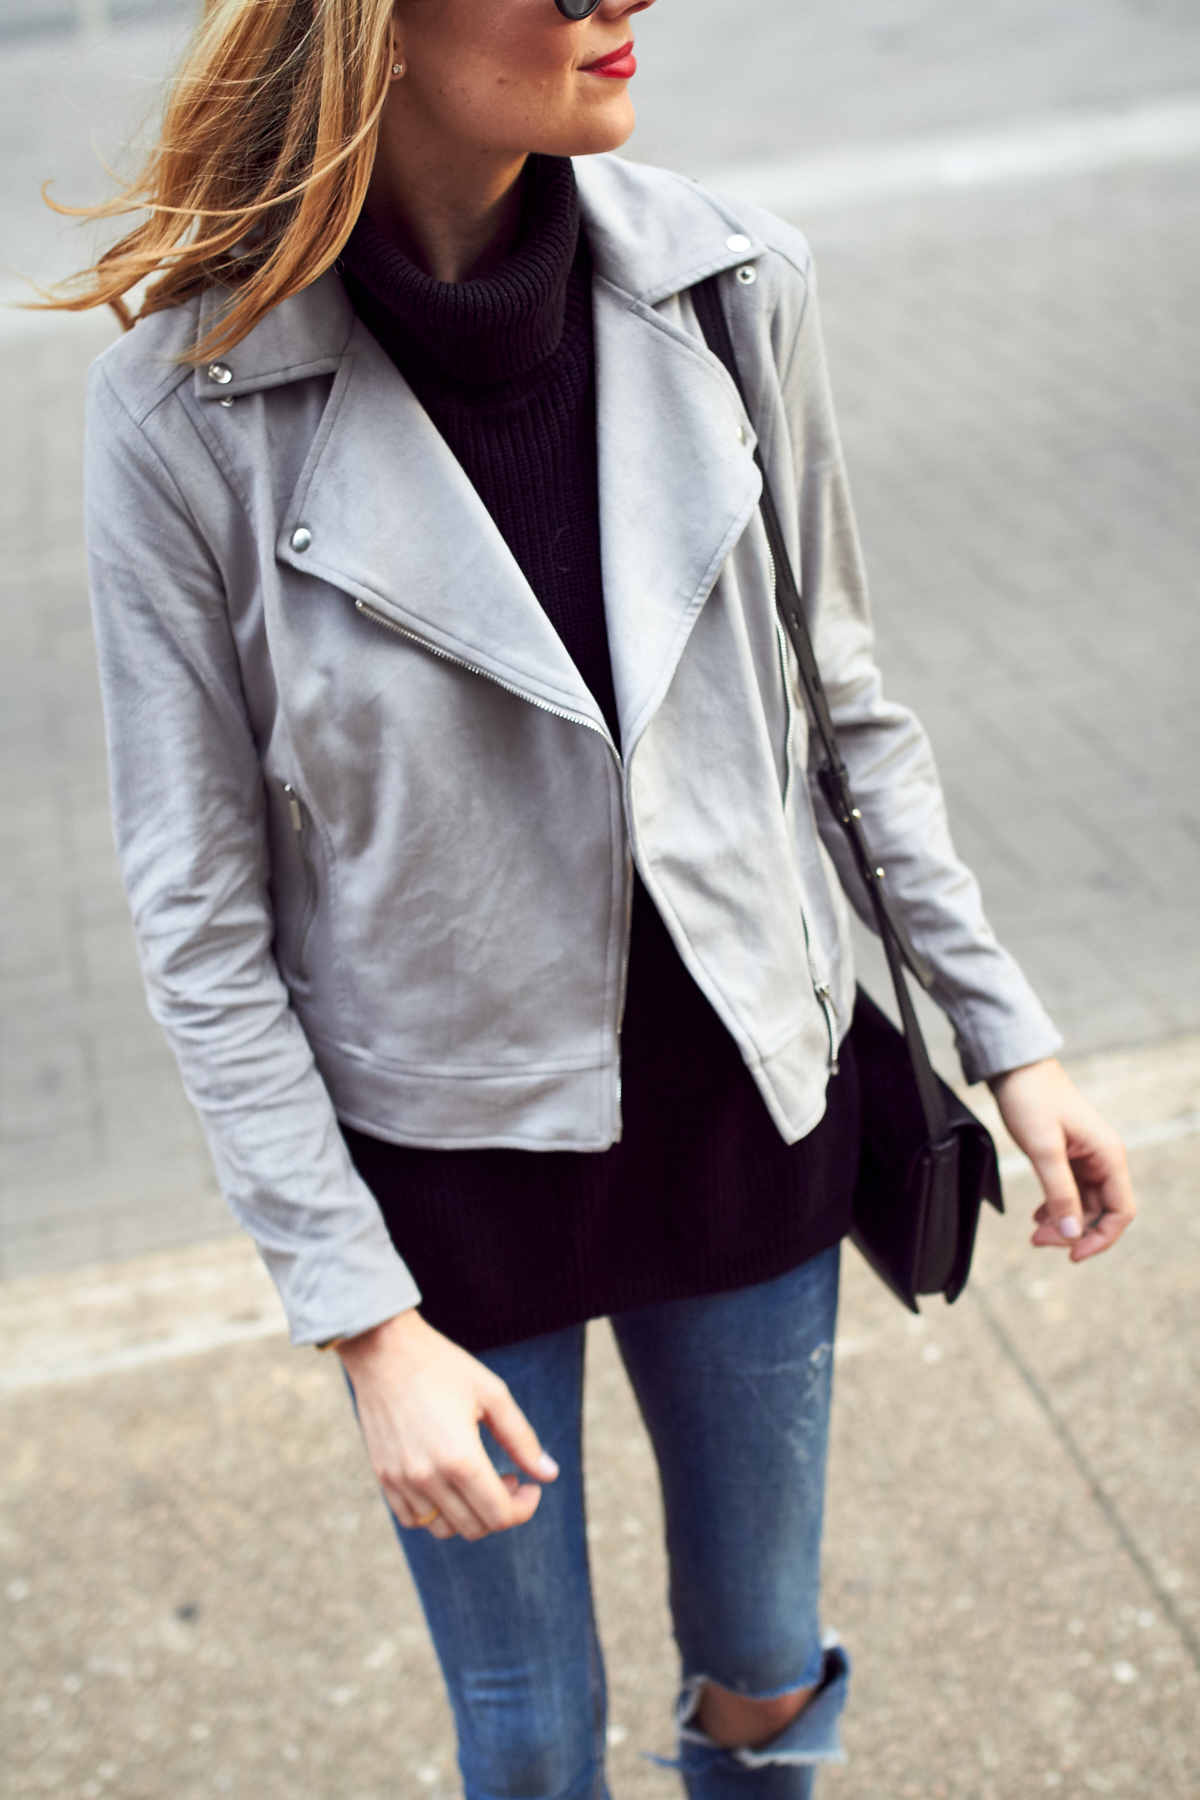 Fall Outfit, Grey Suede Moto Jacket, Black Turtleneck Sweater, Denim Ripped Skinny Jeans